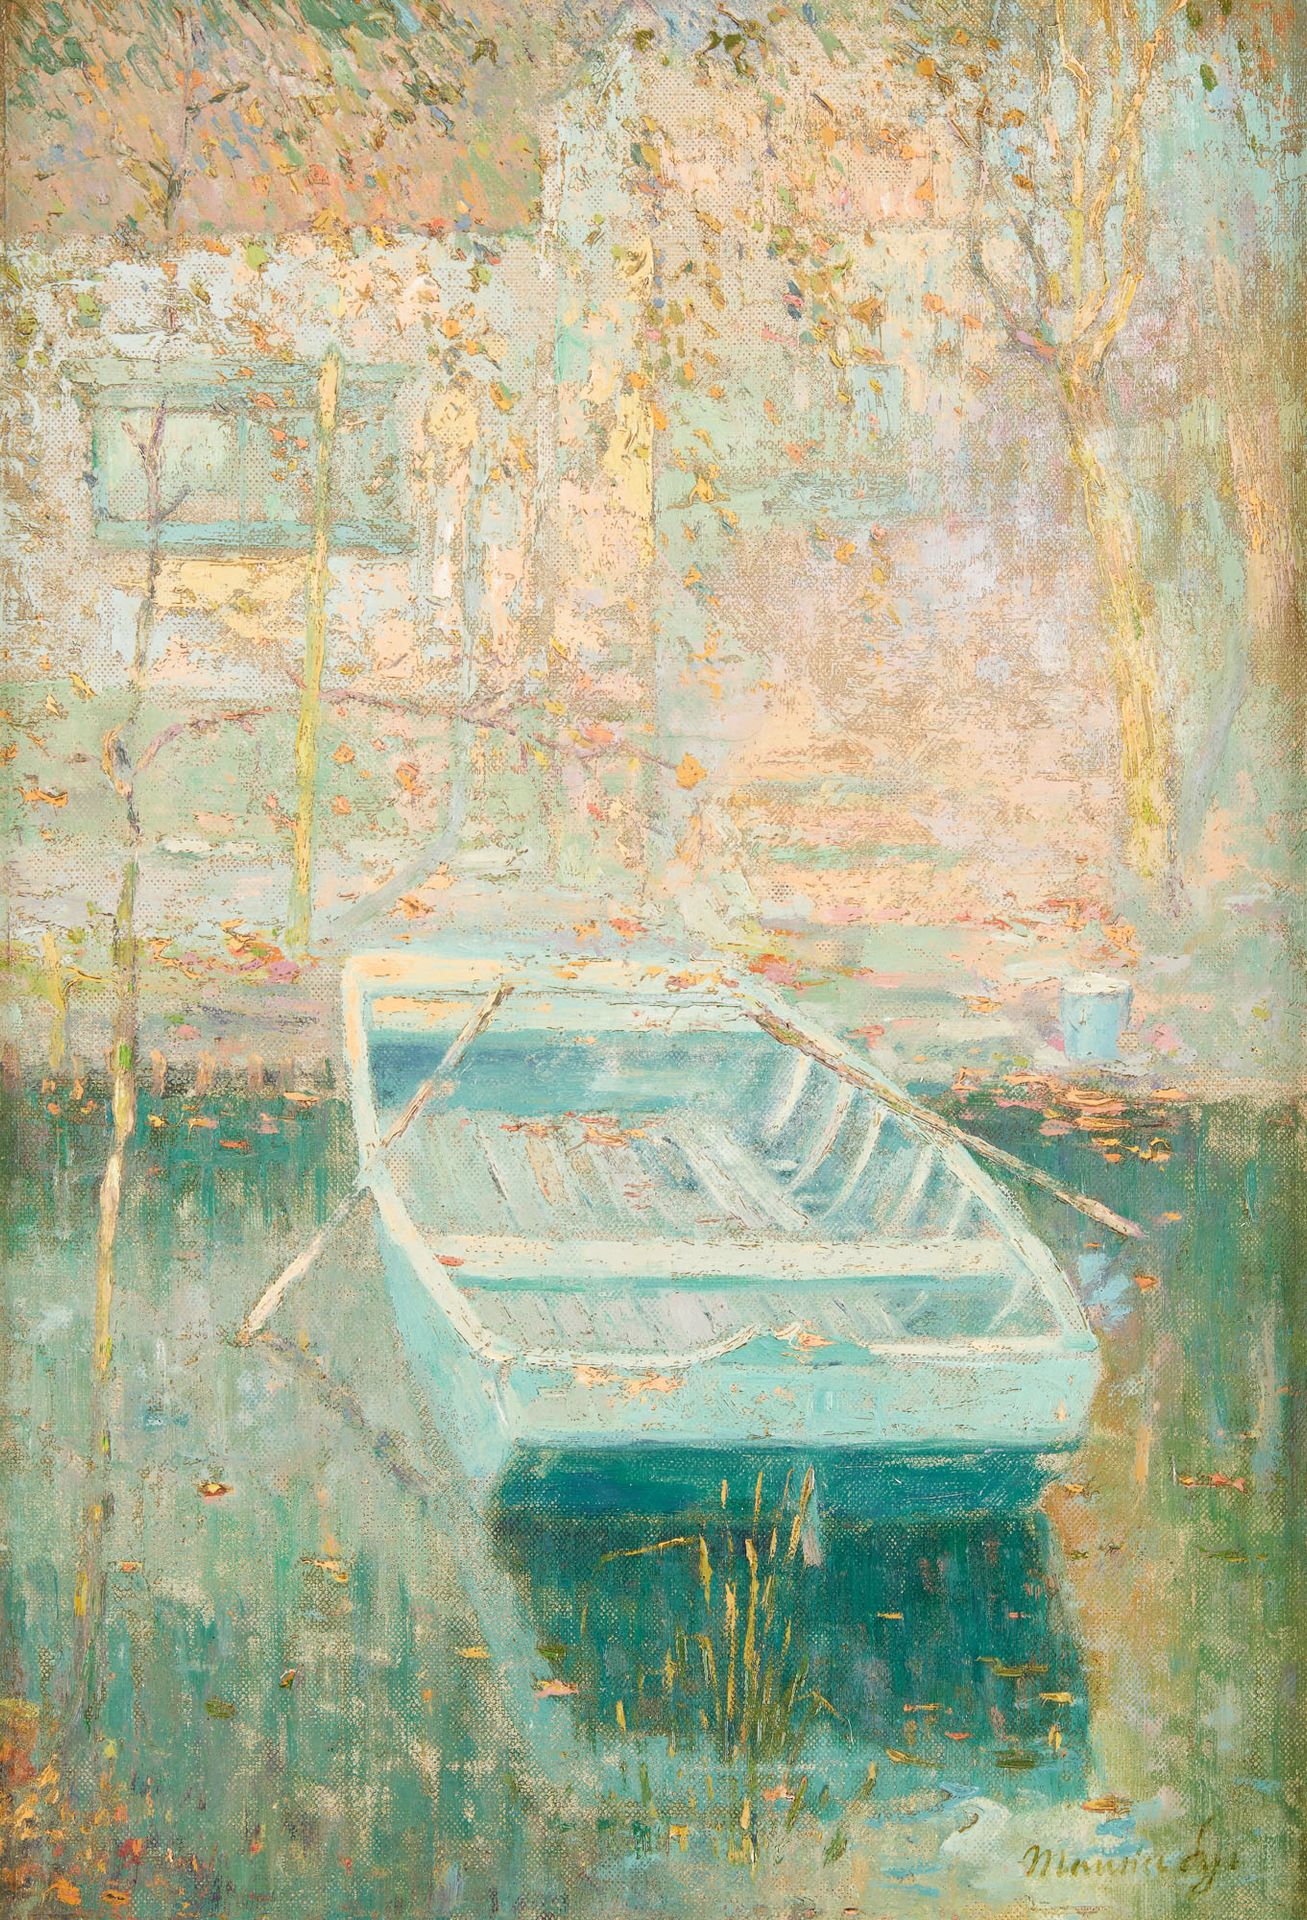 Maurice SYS École hollandaise (1880-1972) Oil on canvas: The moored boat.

Signe&hellip;